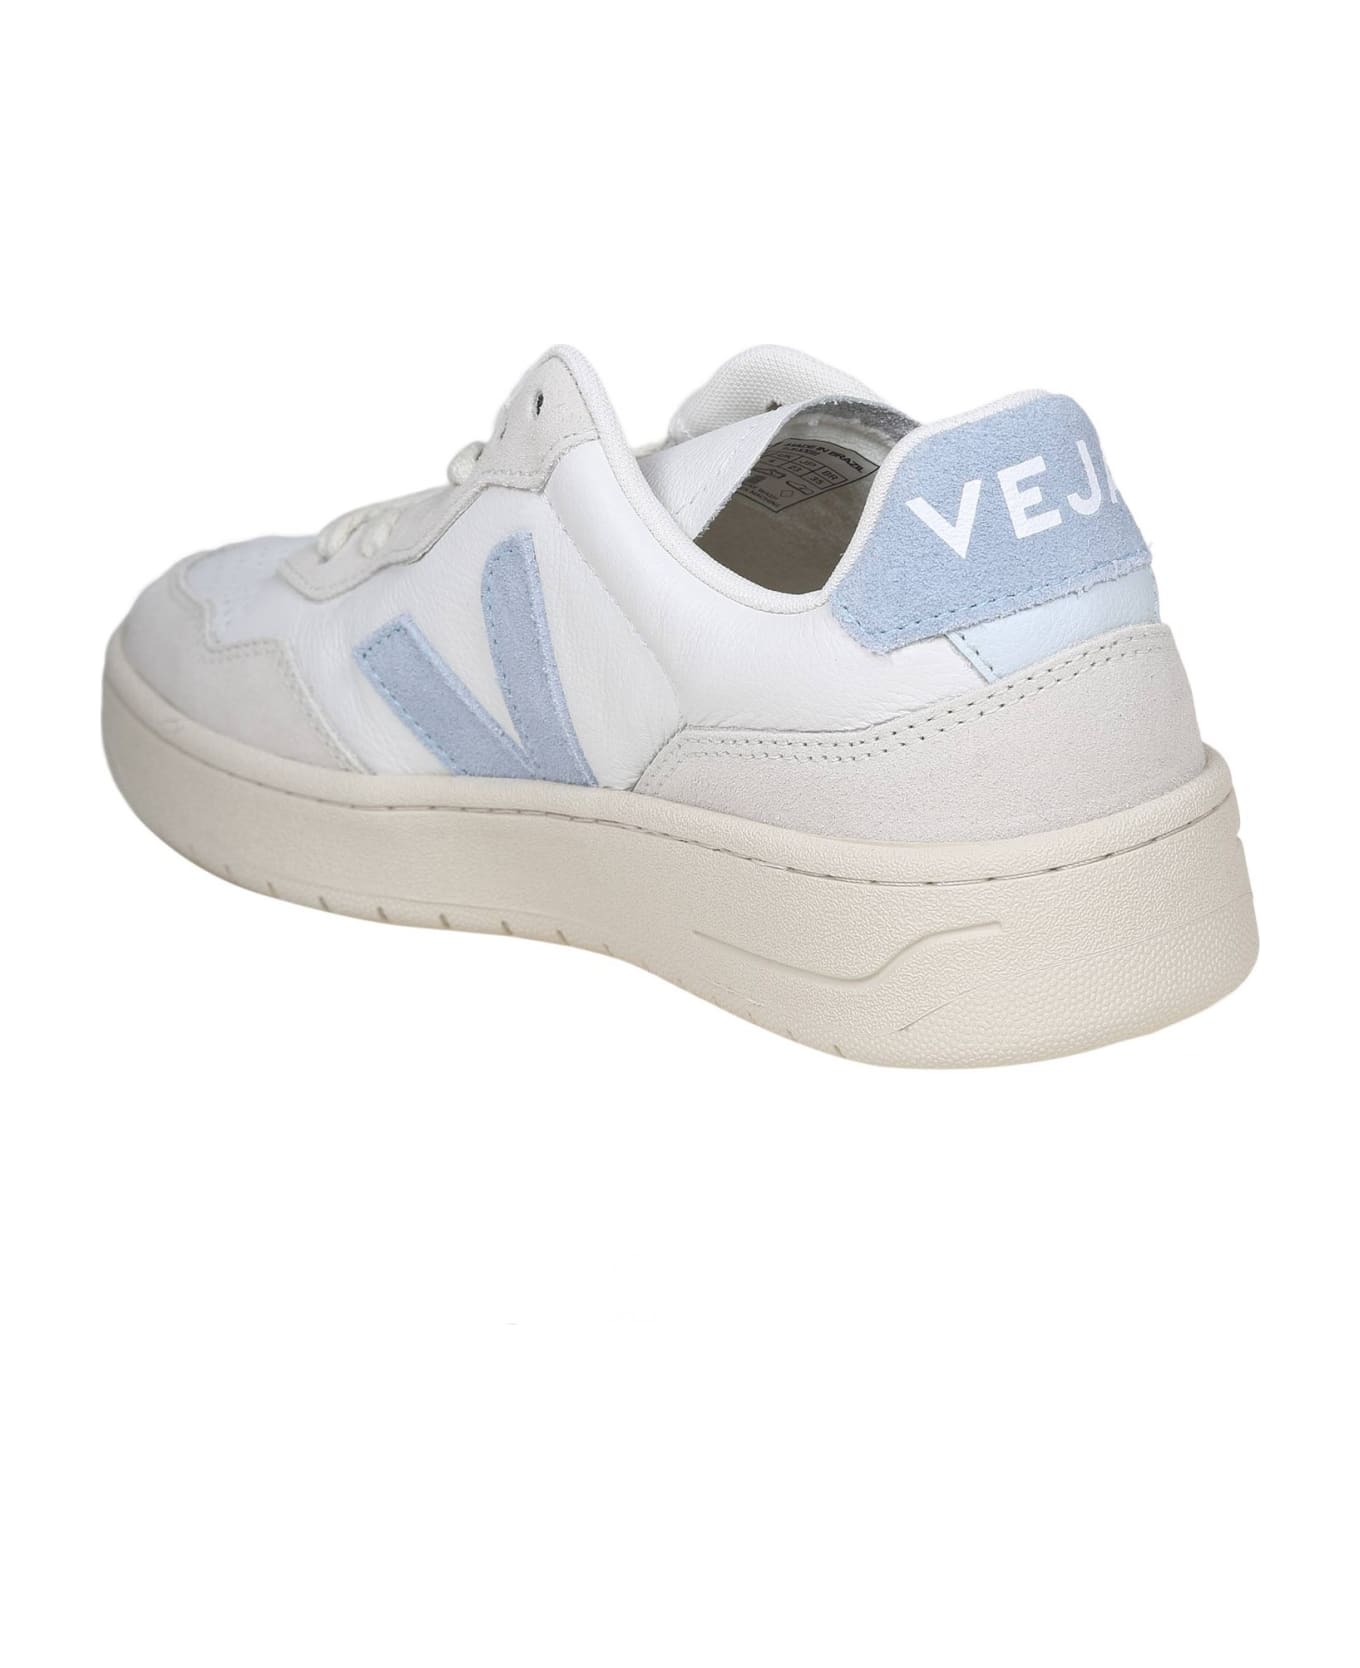 Veja V 90 Sneakers In White And Light Blue Leather And Suede スニーカー